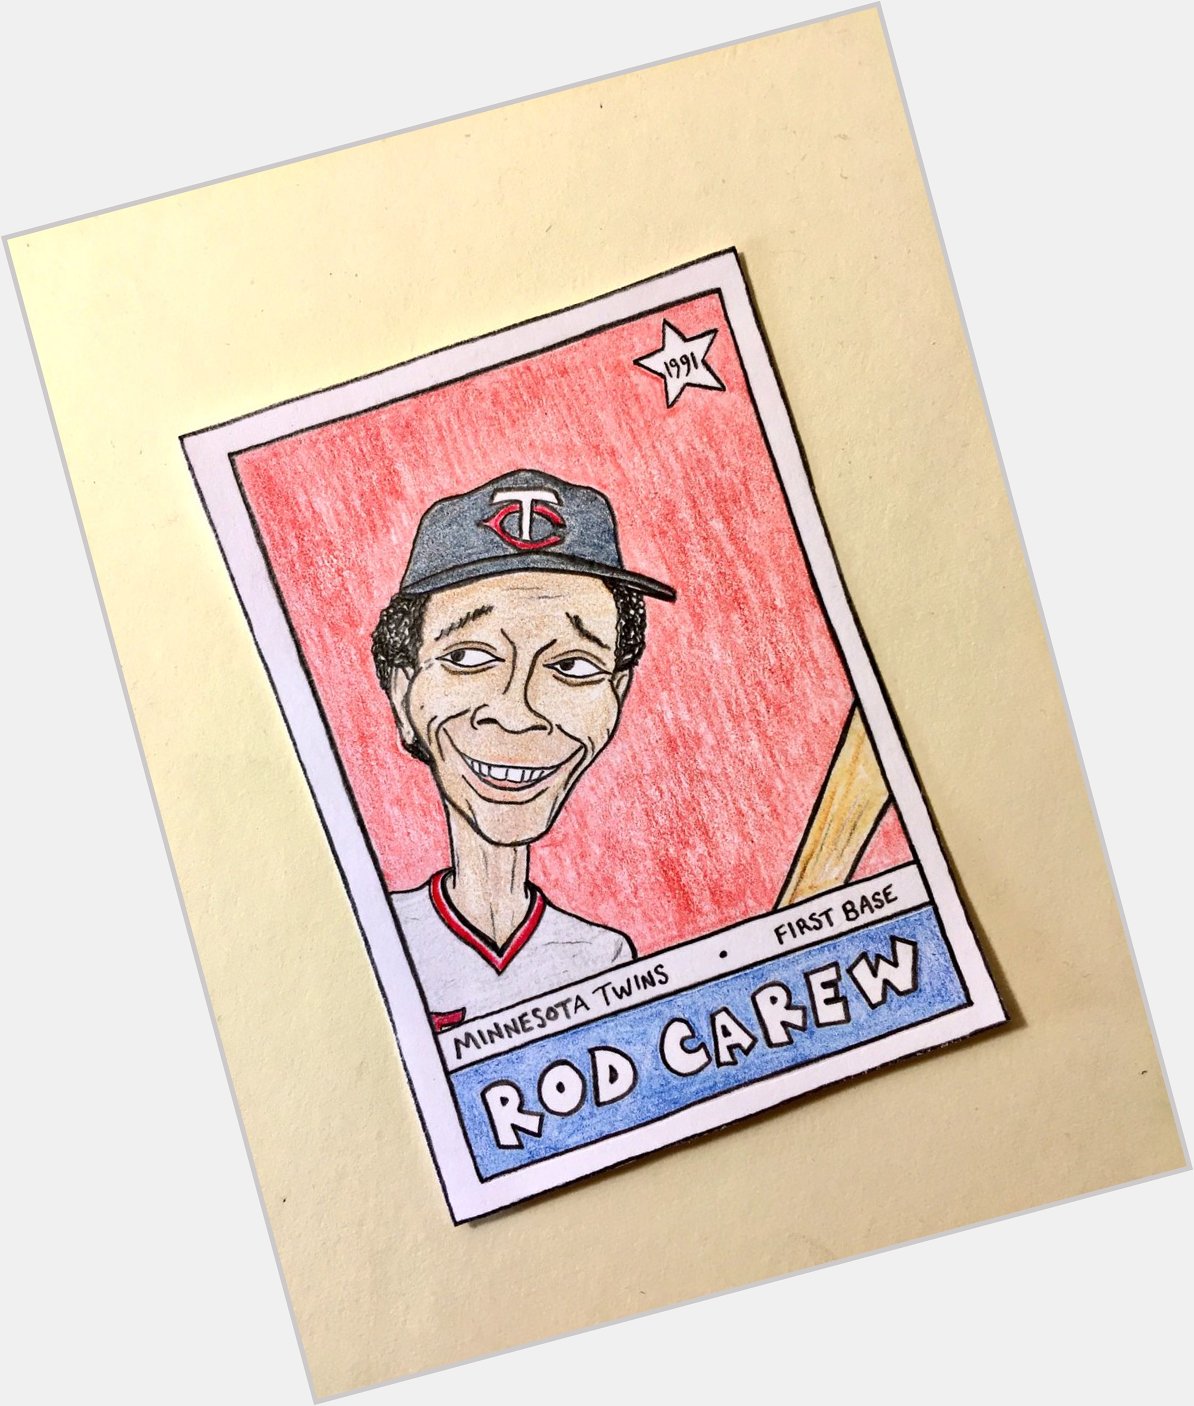 Wishing a very happy 73rd birthday to Hall of Famer and 7x batting champ Rod Carew!  